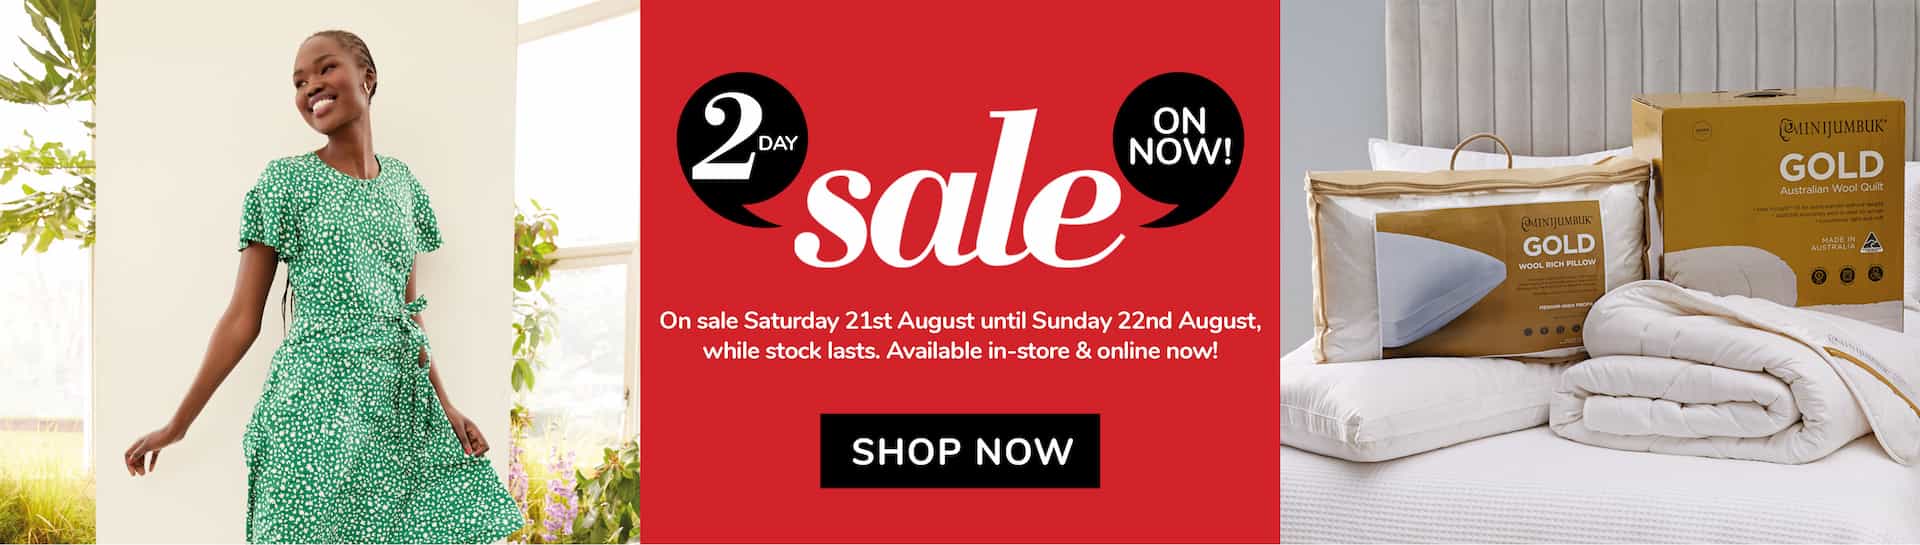 2 Day sale - Up to 50% OFF on clothing, footwear, kitchenware & more